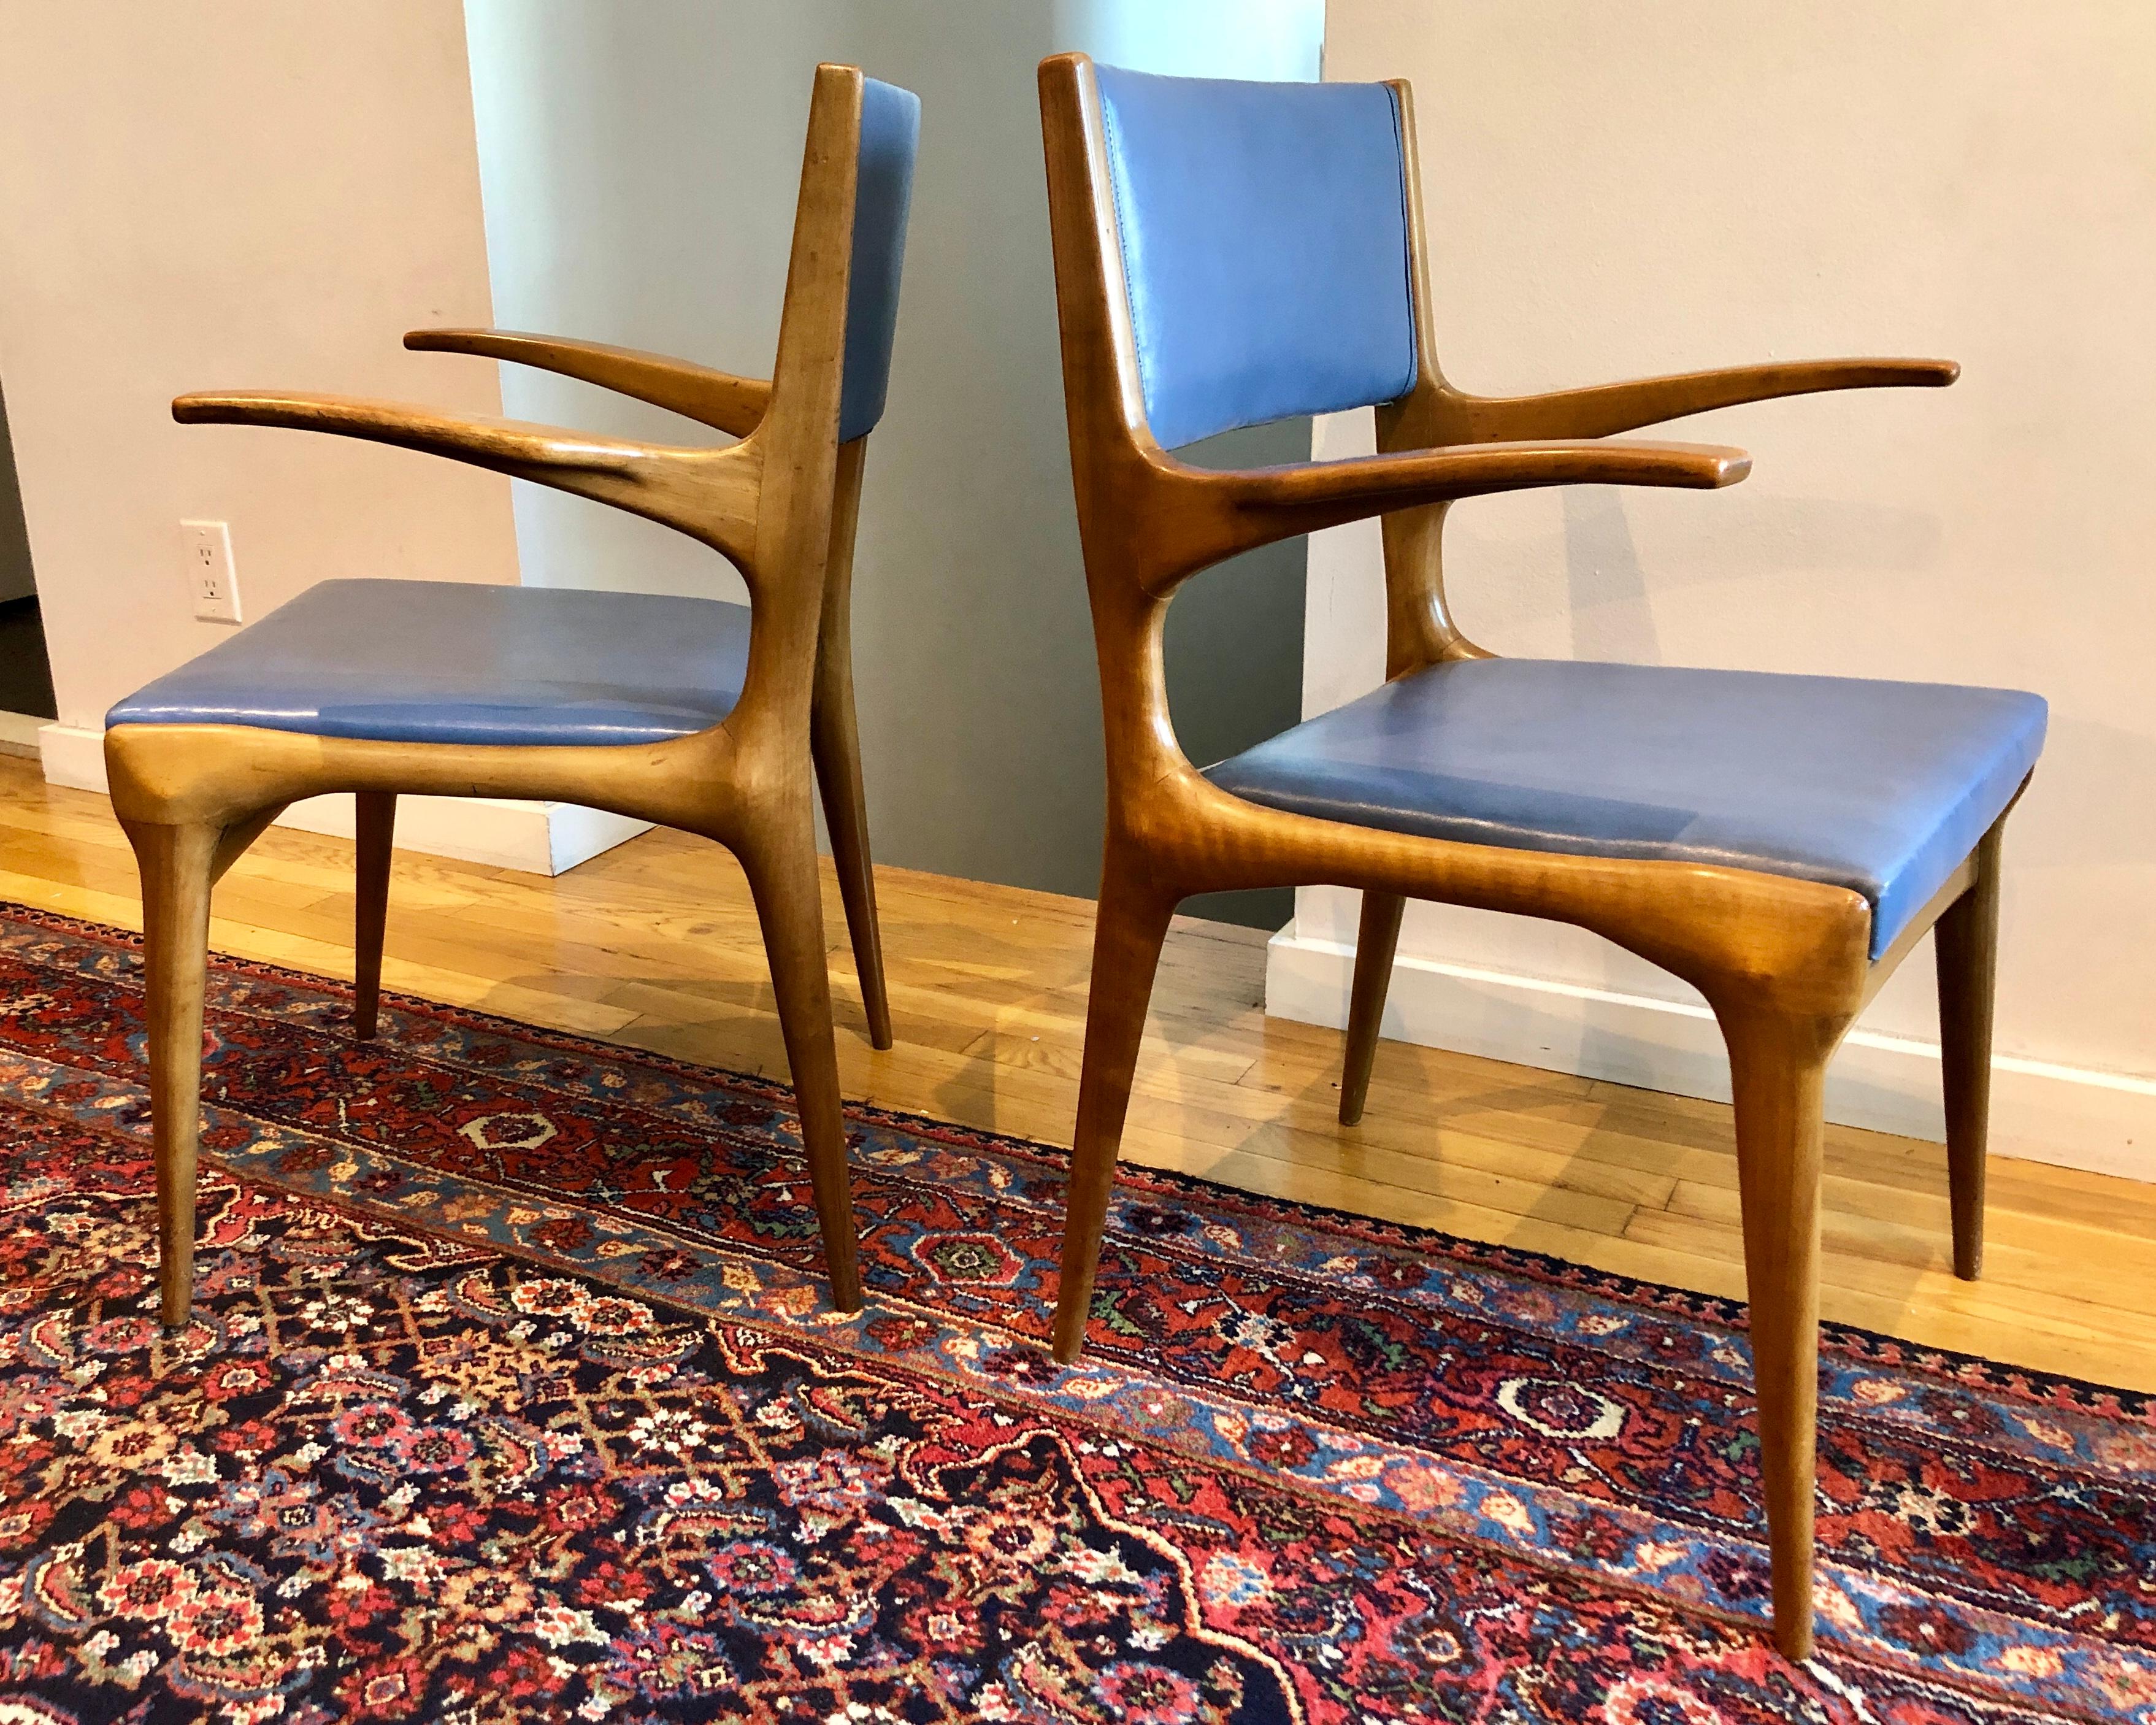 Italian walnut armchair with original blue skai upholstery, beautifully carved with an animal-like fluidity. By Cassina, retailed through M. Singer & Sons.